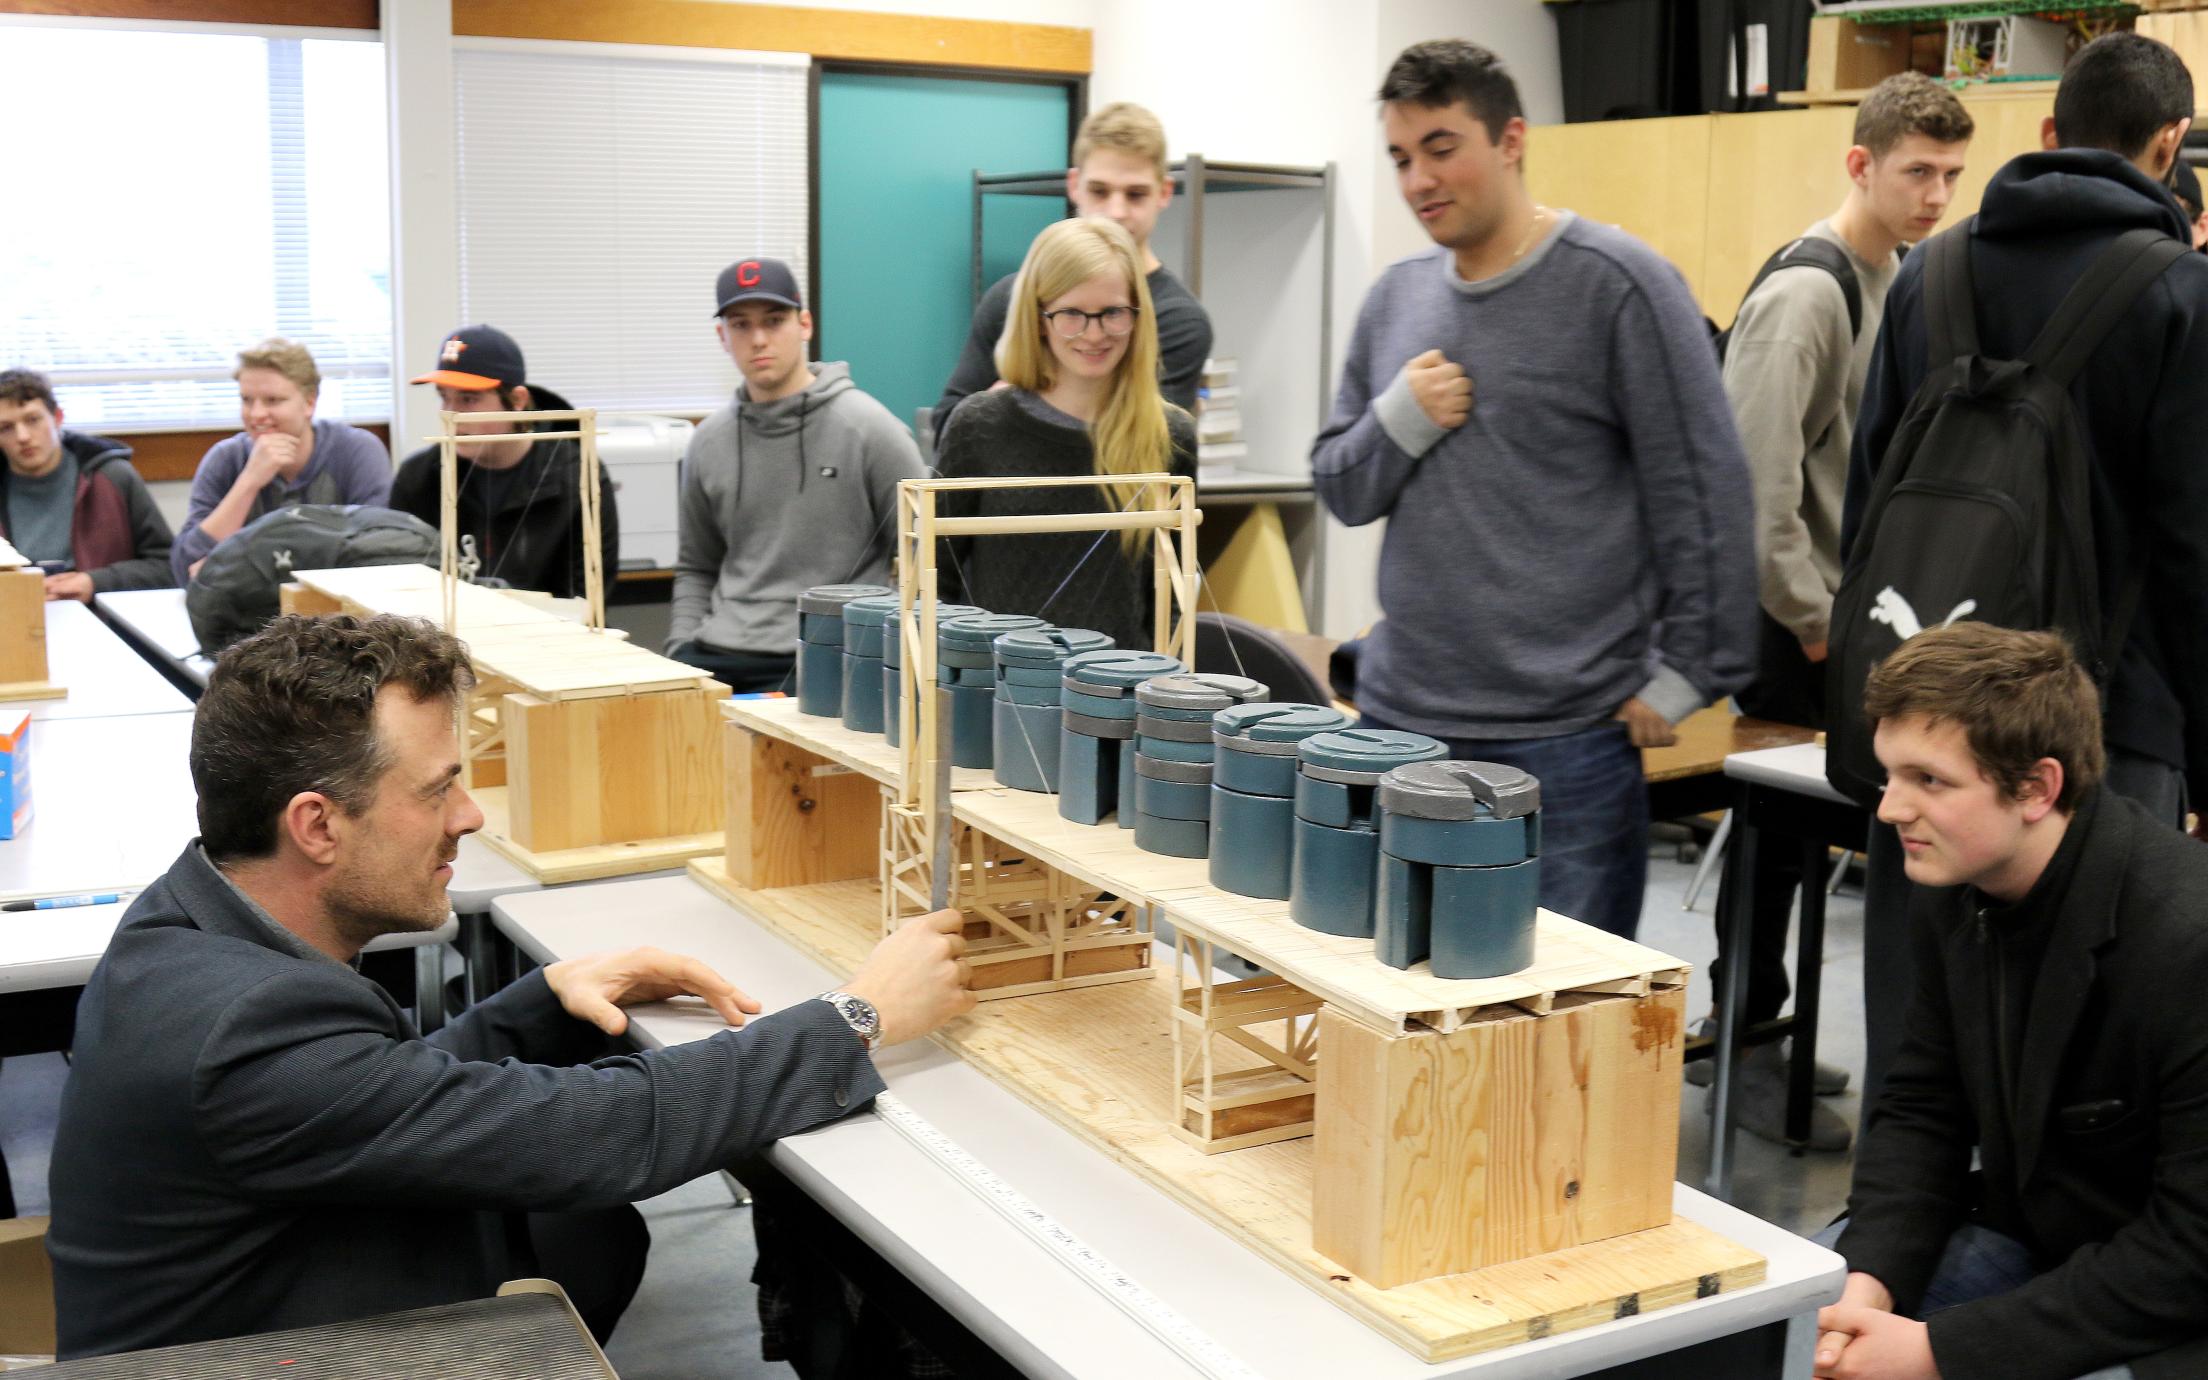 VIU Engineering students working on a bridge design for a contest